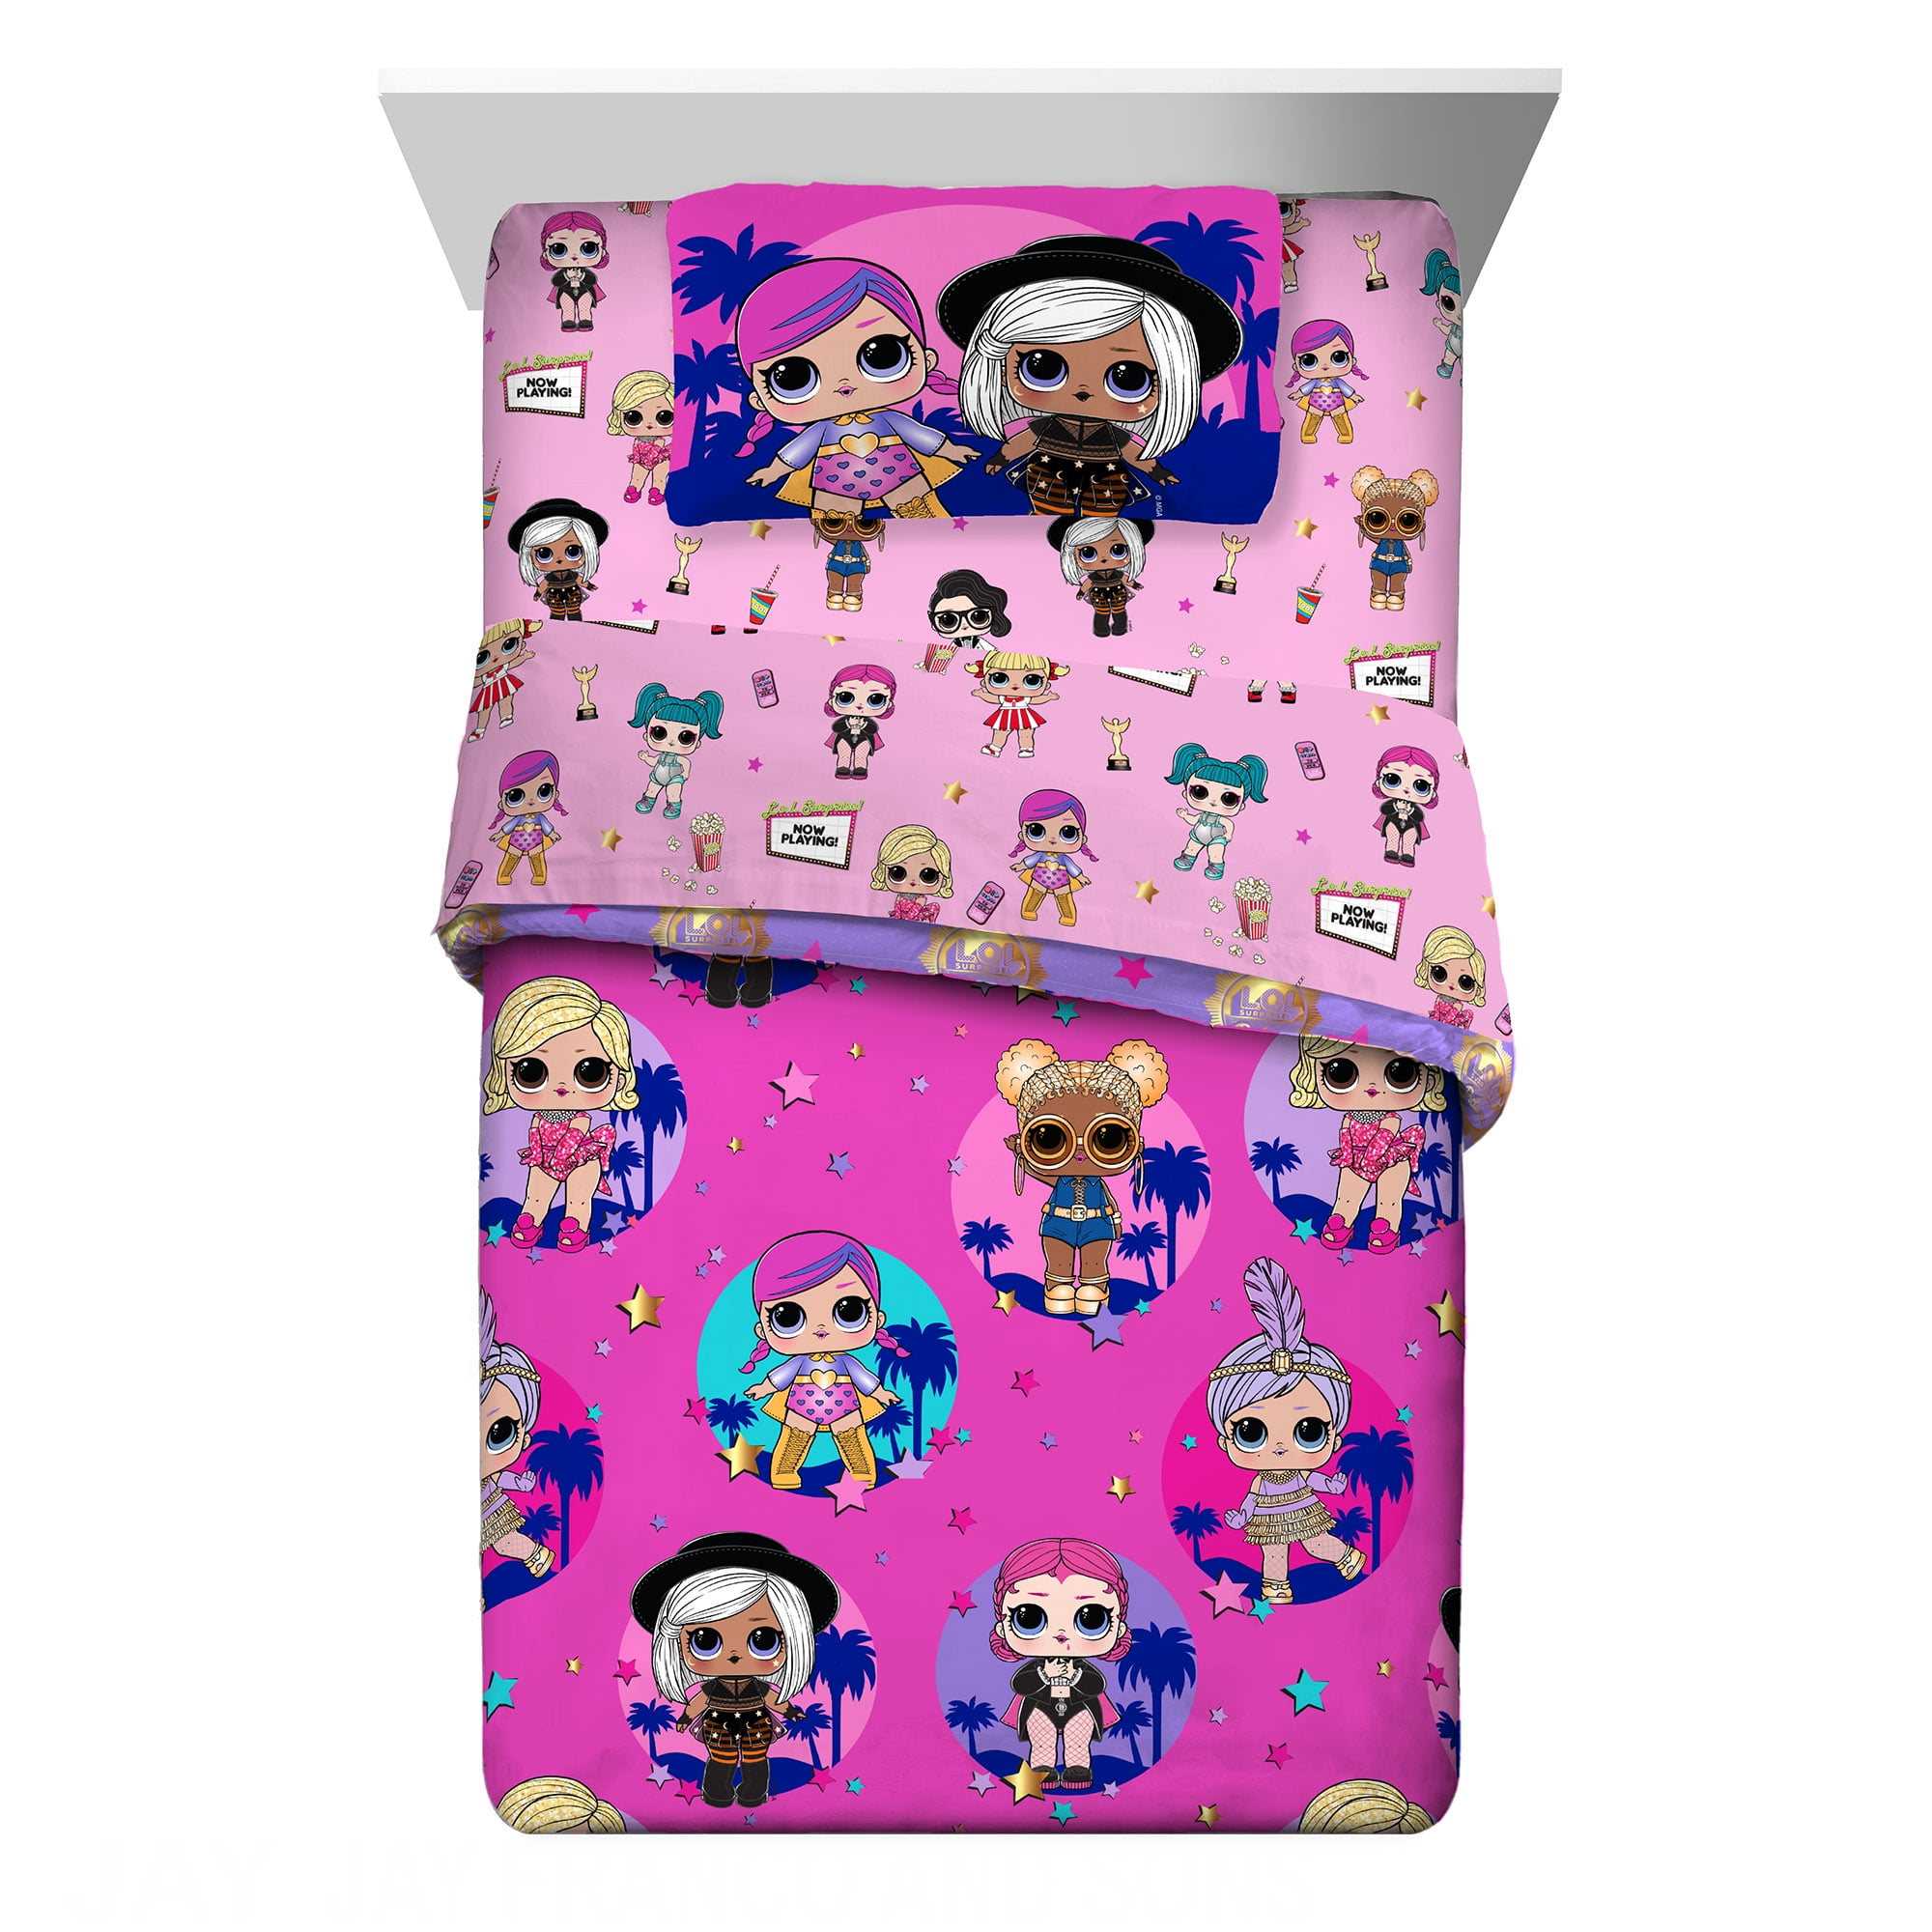 LOL Surprise 4 Piece Twin Bedding Set Bed in Bag Comforter Sheets Tote 2dayShip 